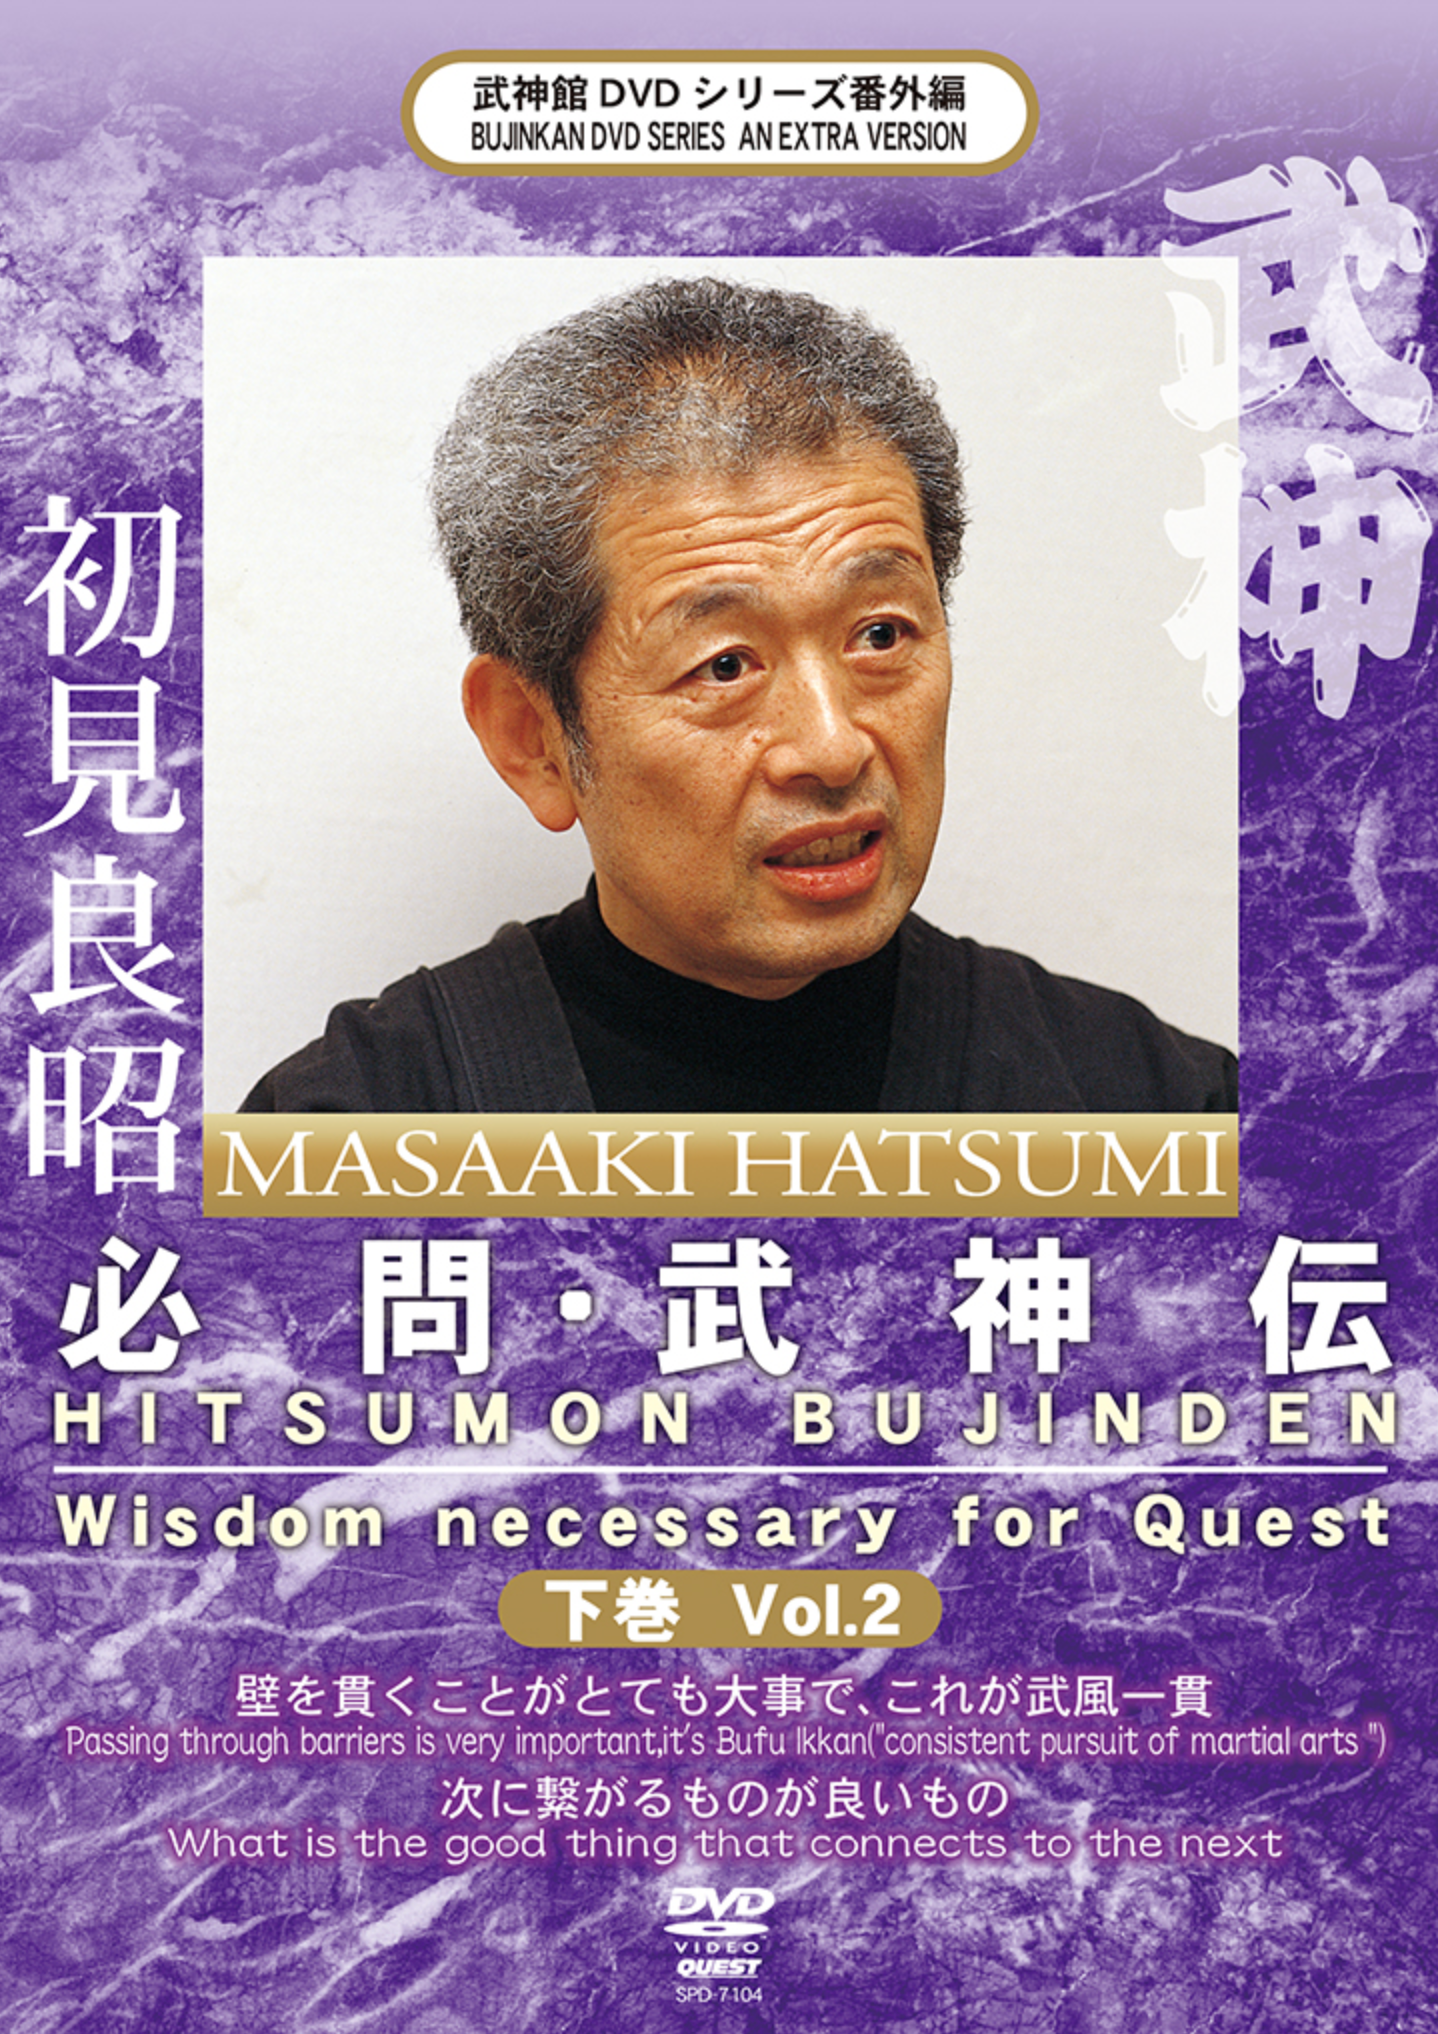 Hitsumon Bujinden Vol 2: Wisdom Necessary for Quest DVD with Masaaki Hatsumi - Budovideos Inc